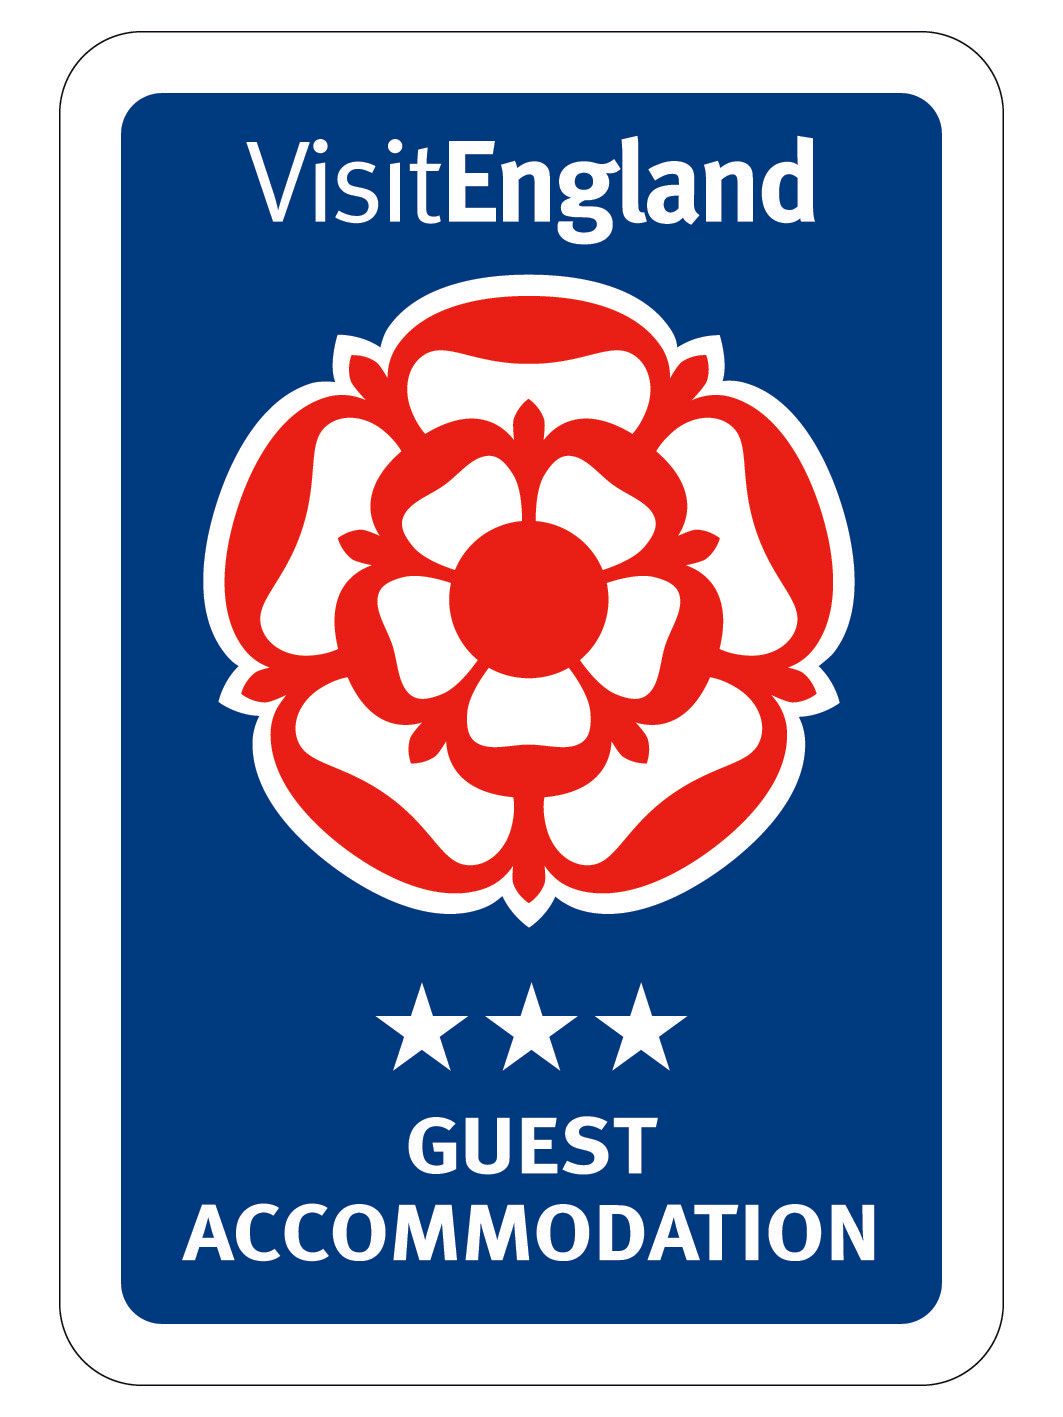 Our hotel has four starts for guest accommodation by Enjoy England